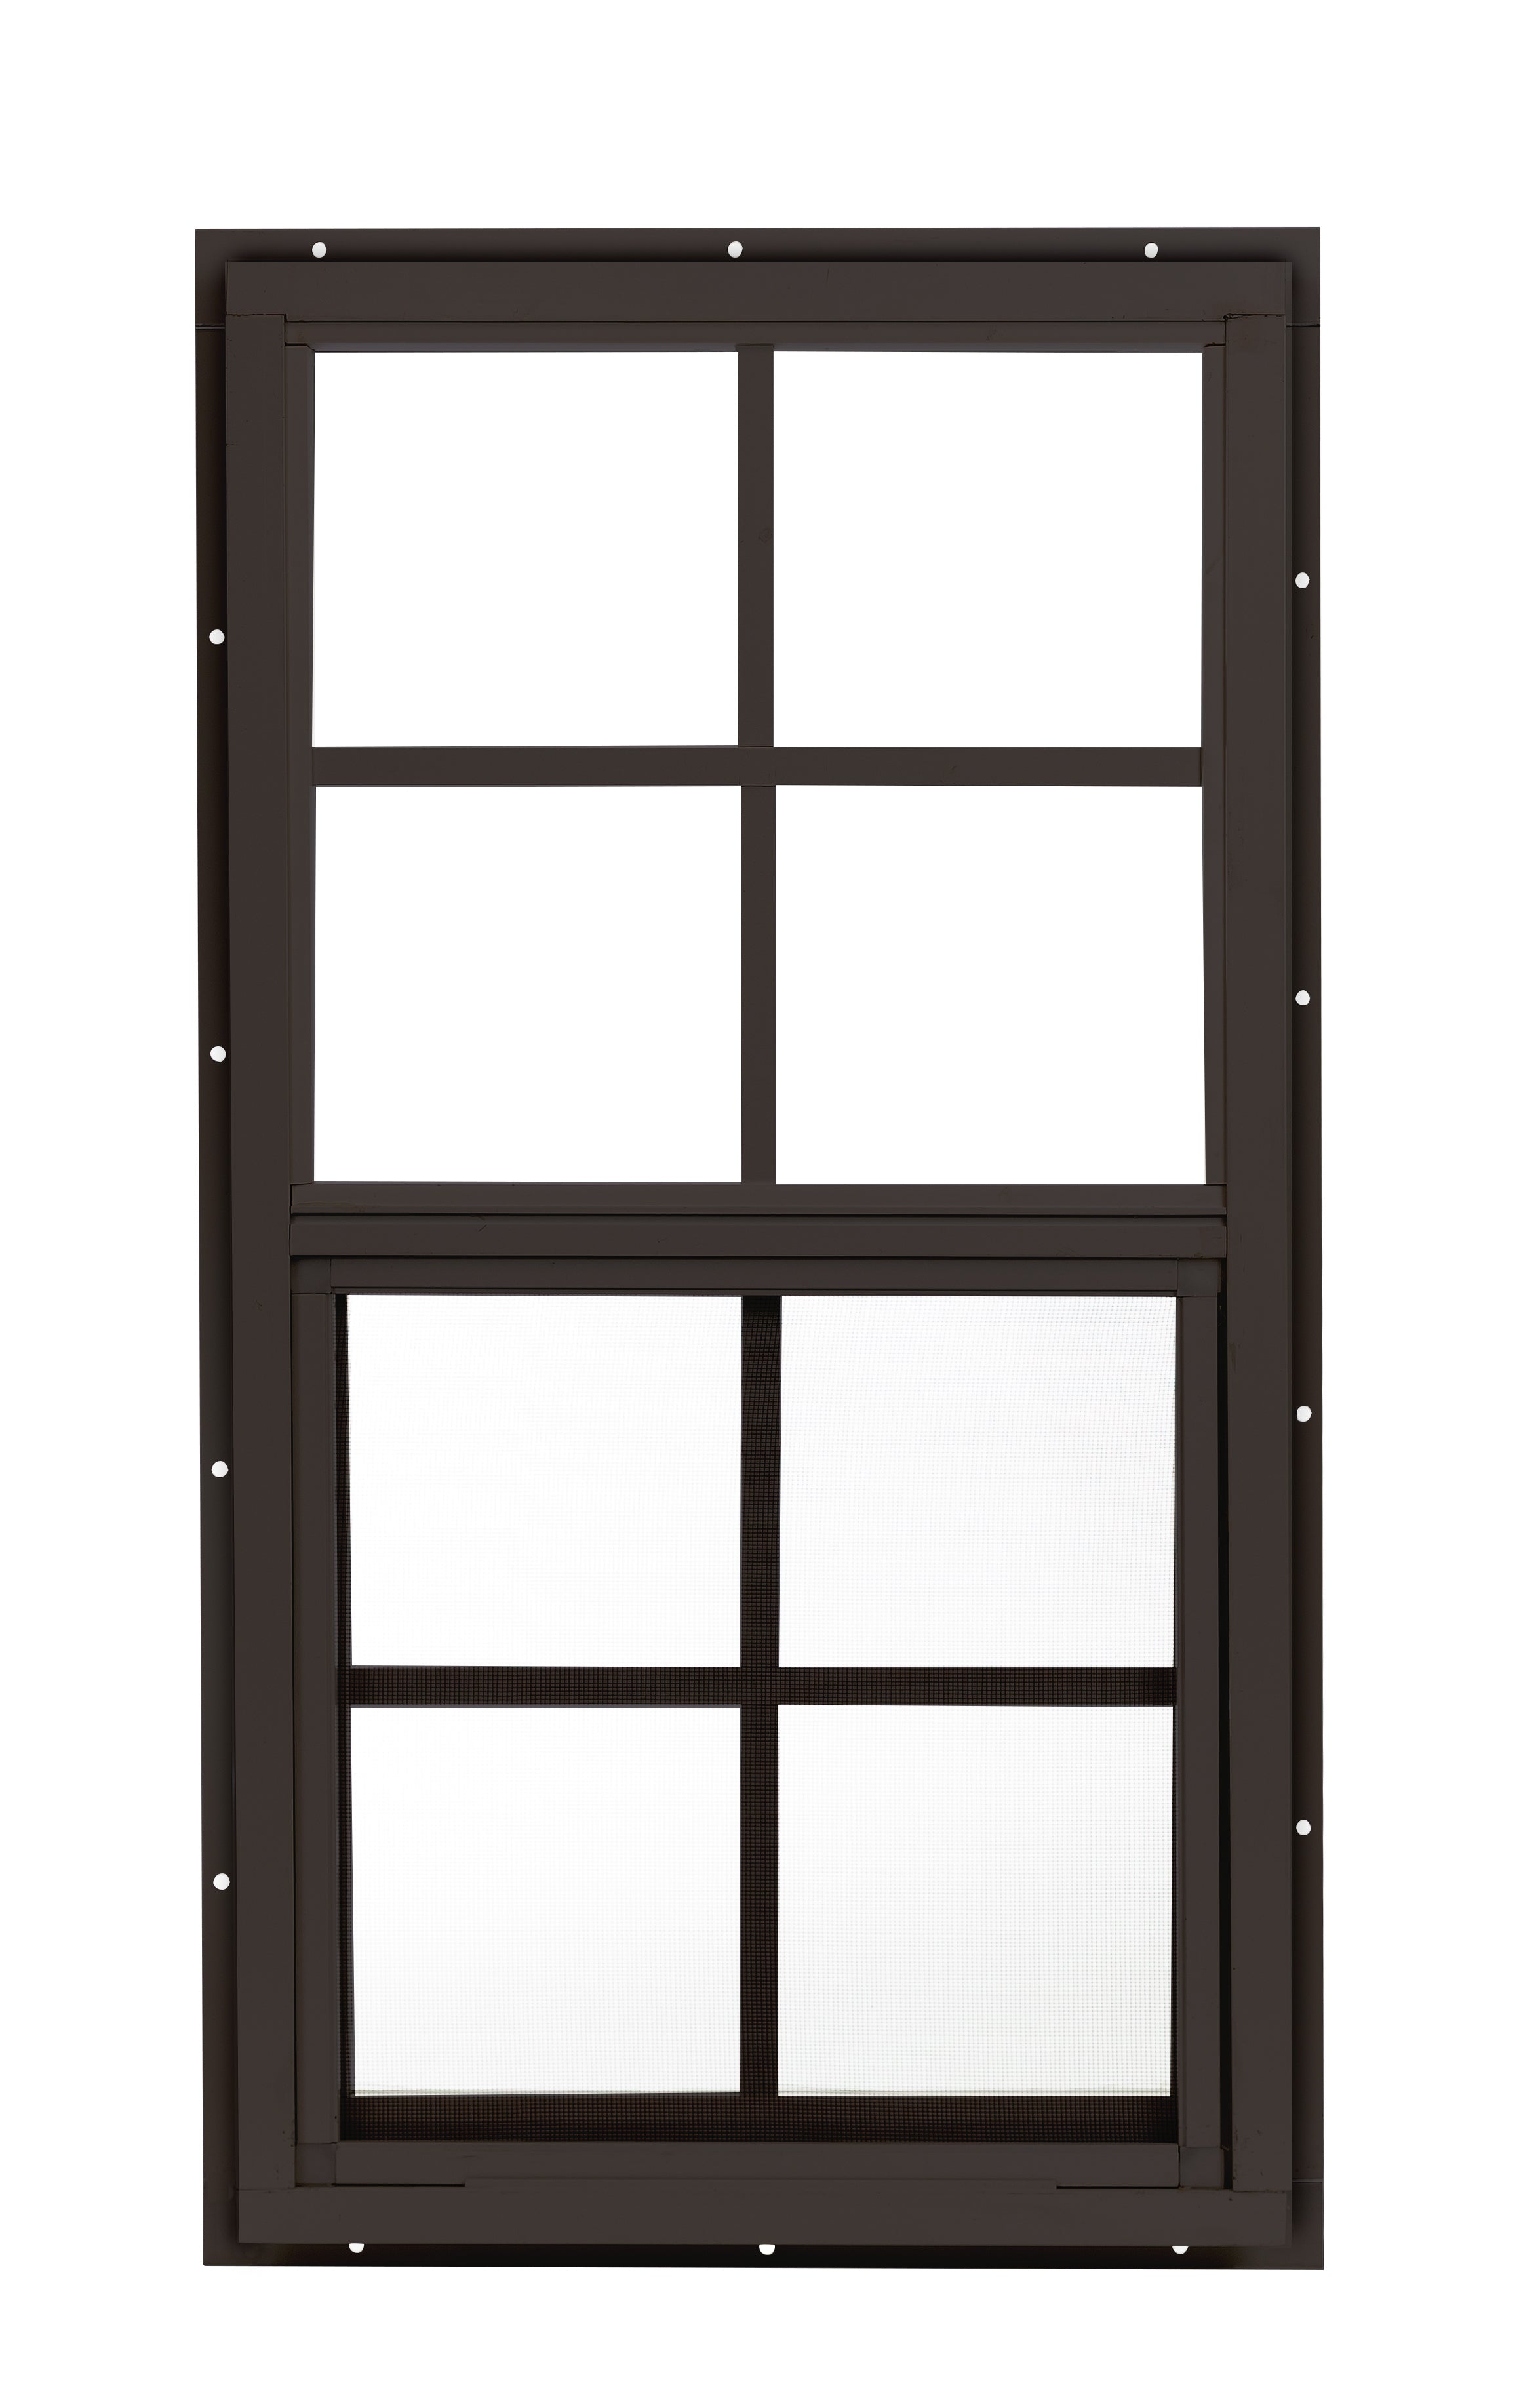 14" W x 27" H Single Hung J-Lap Mount Brown Window for Sheds, Playhouses, and MORE